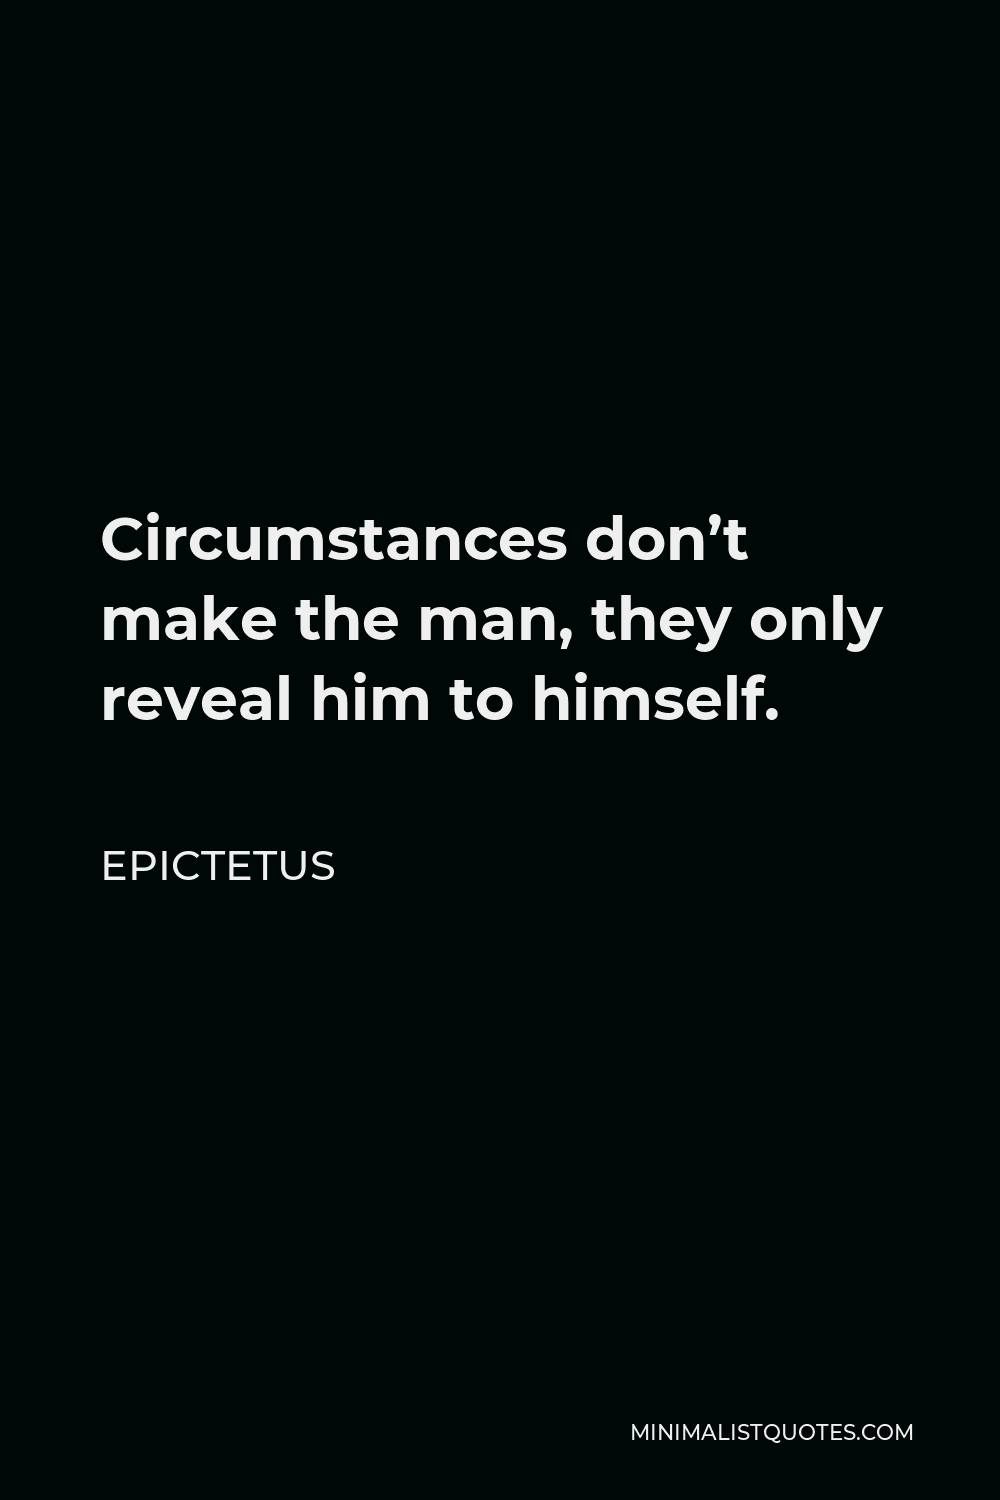 Epictetus Quote - Circumstances don’t make the man, they only reveal him to himself.